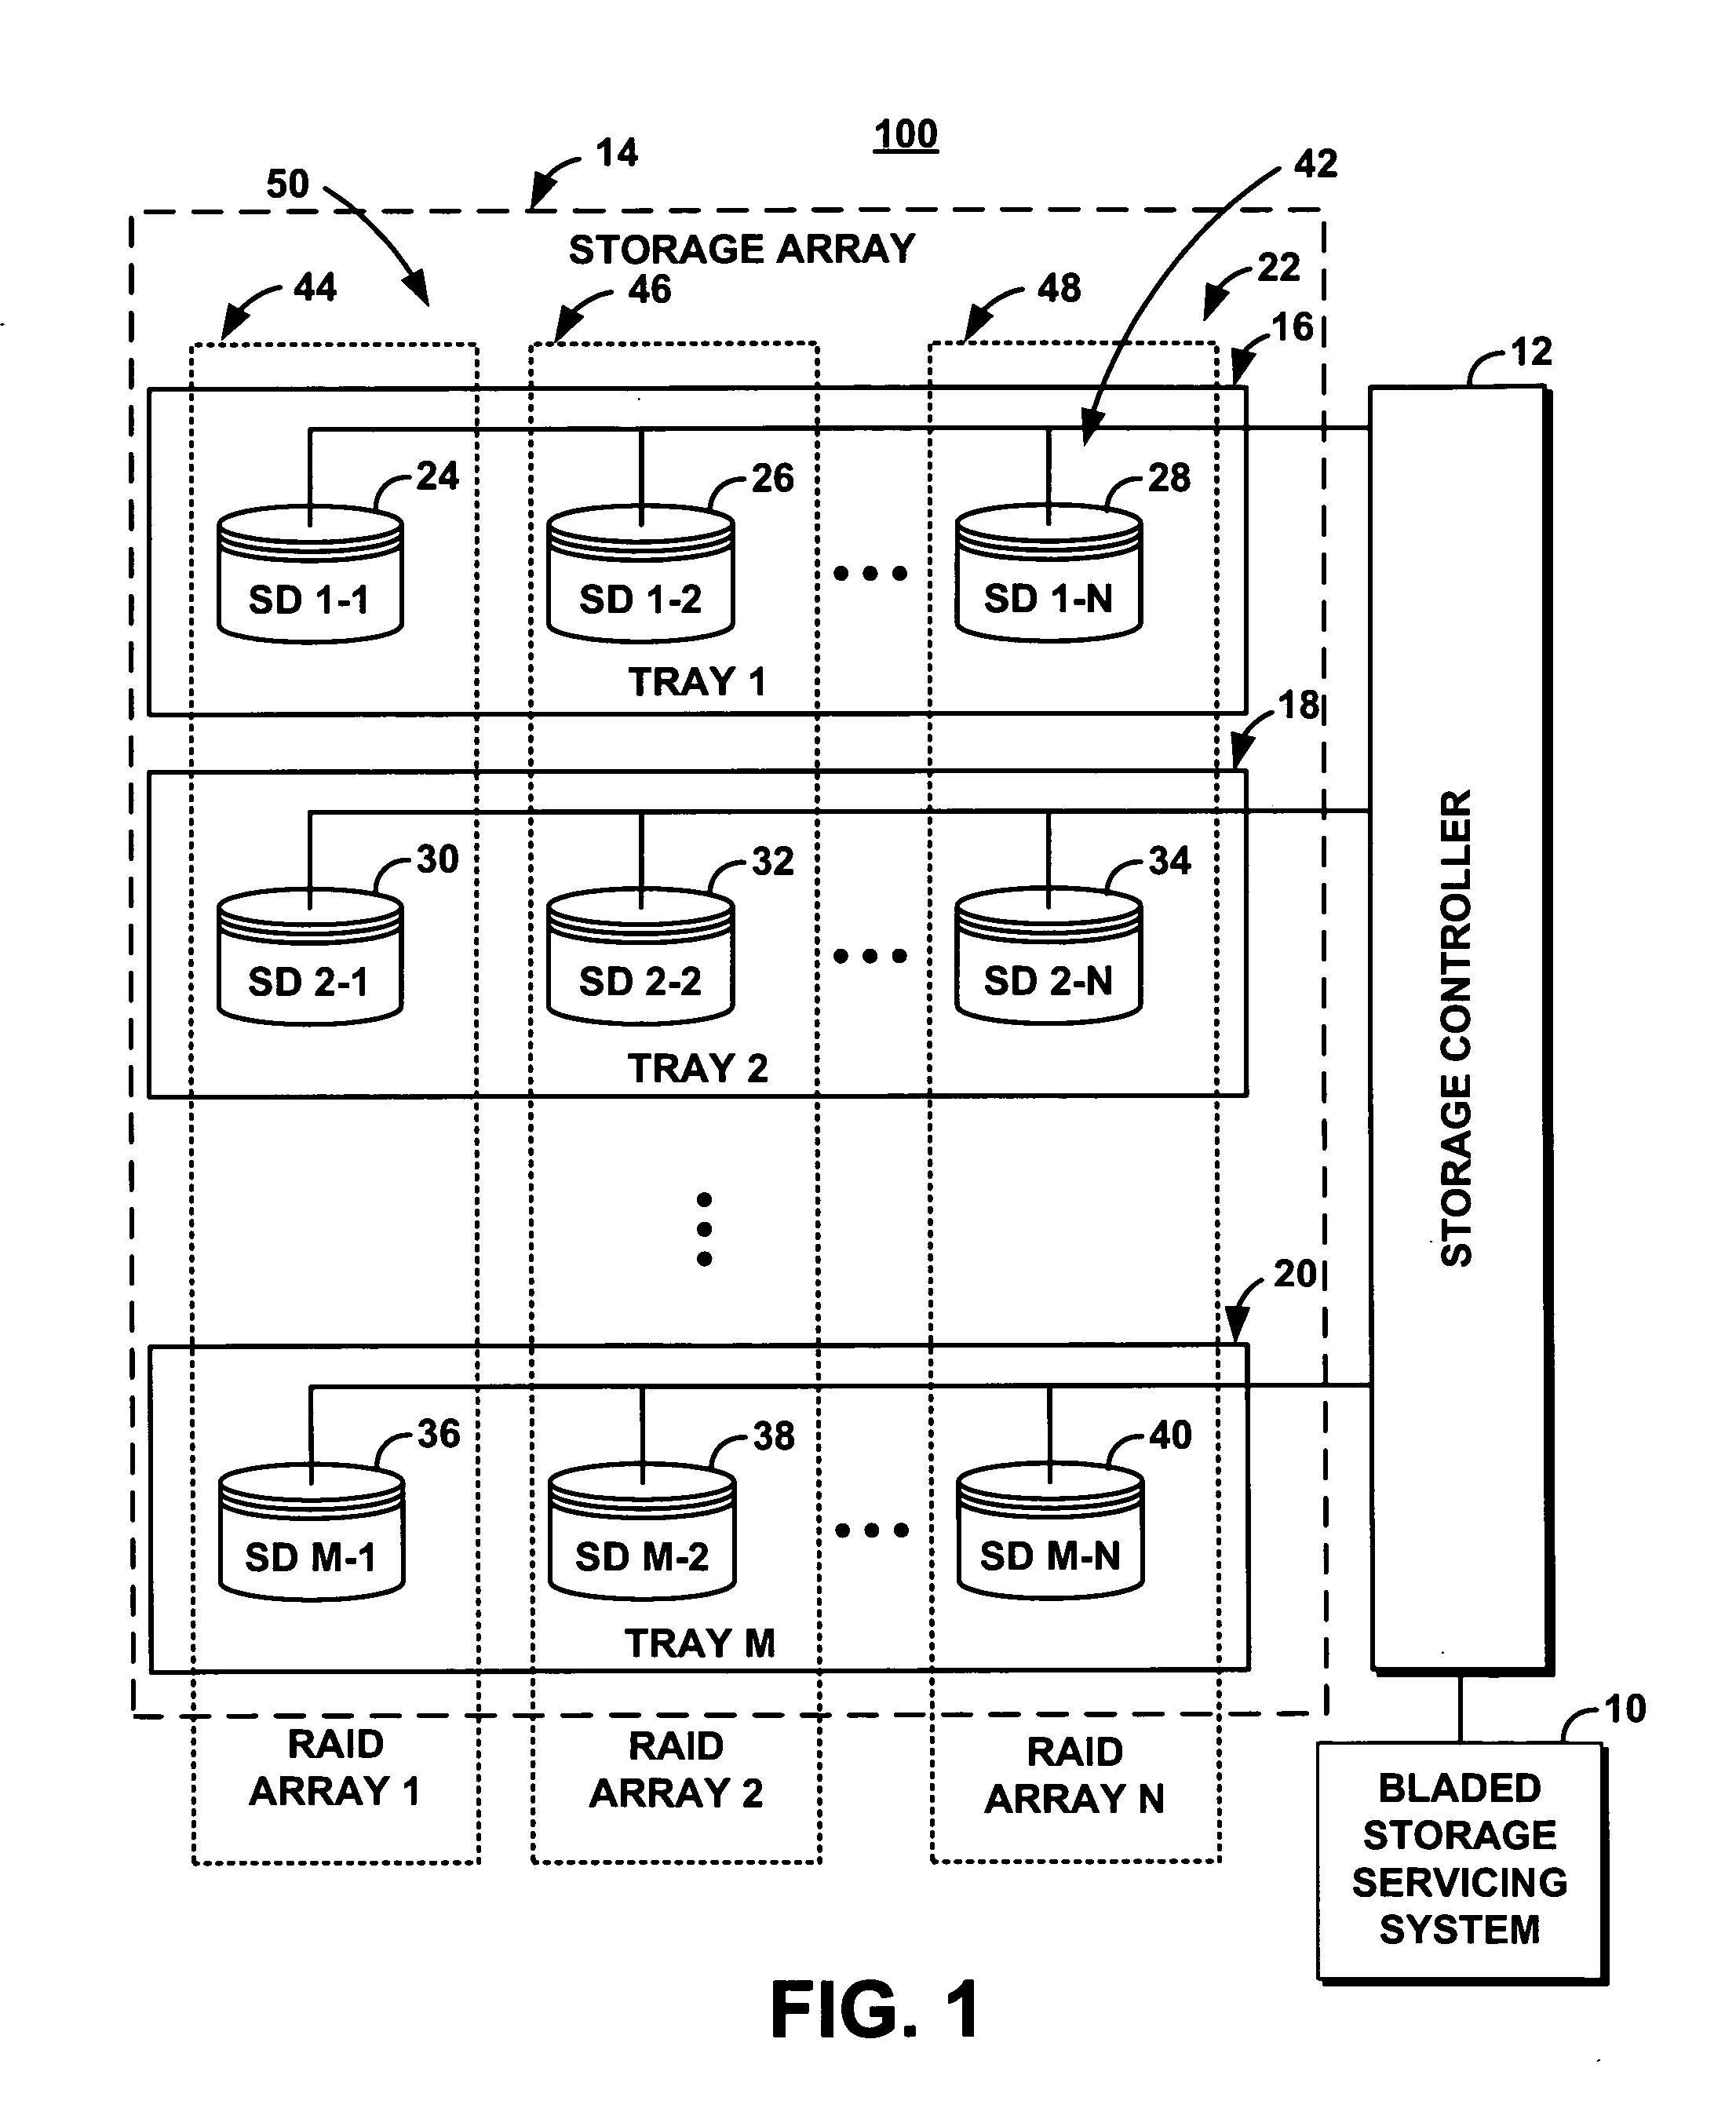 System and method for servicing storage devices in a bladed storage subsystem